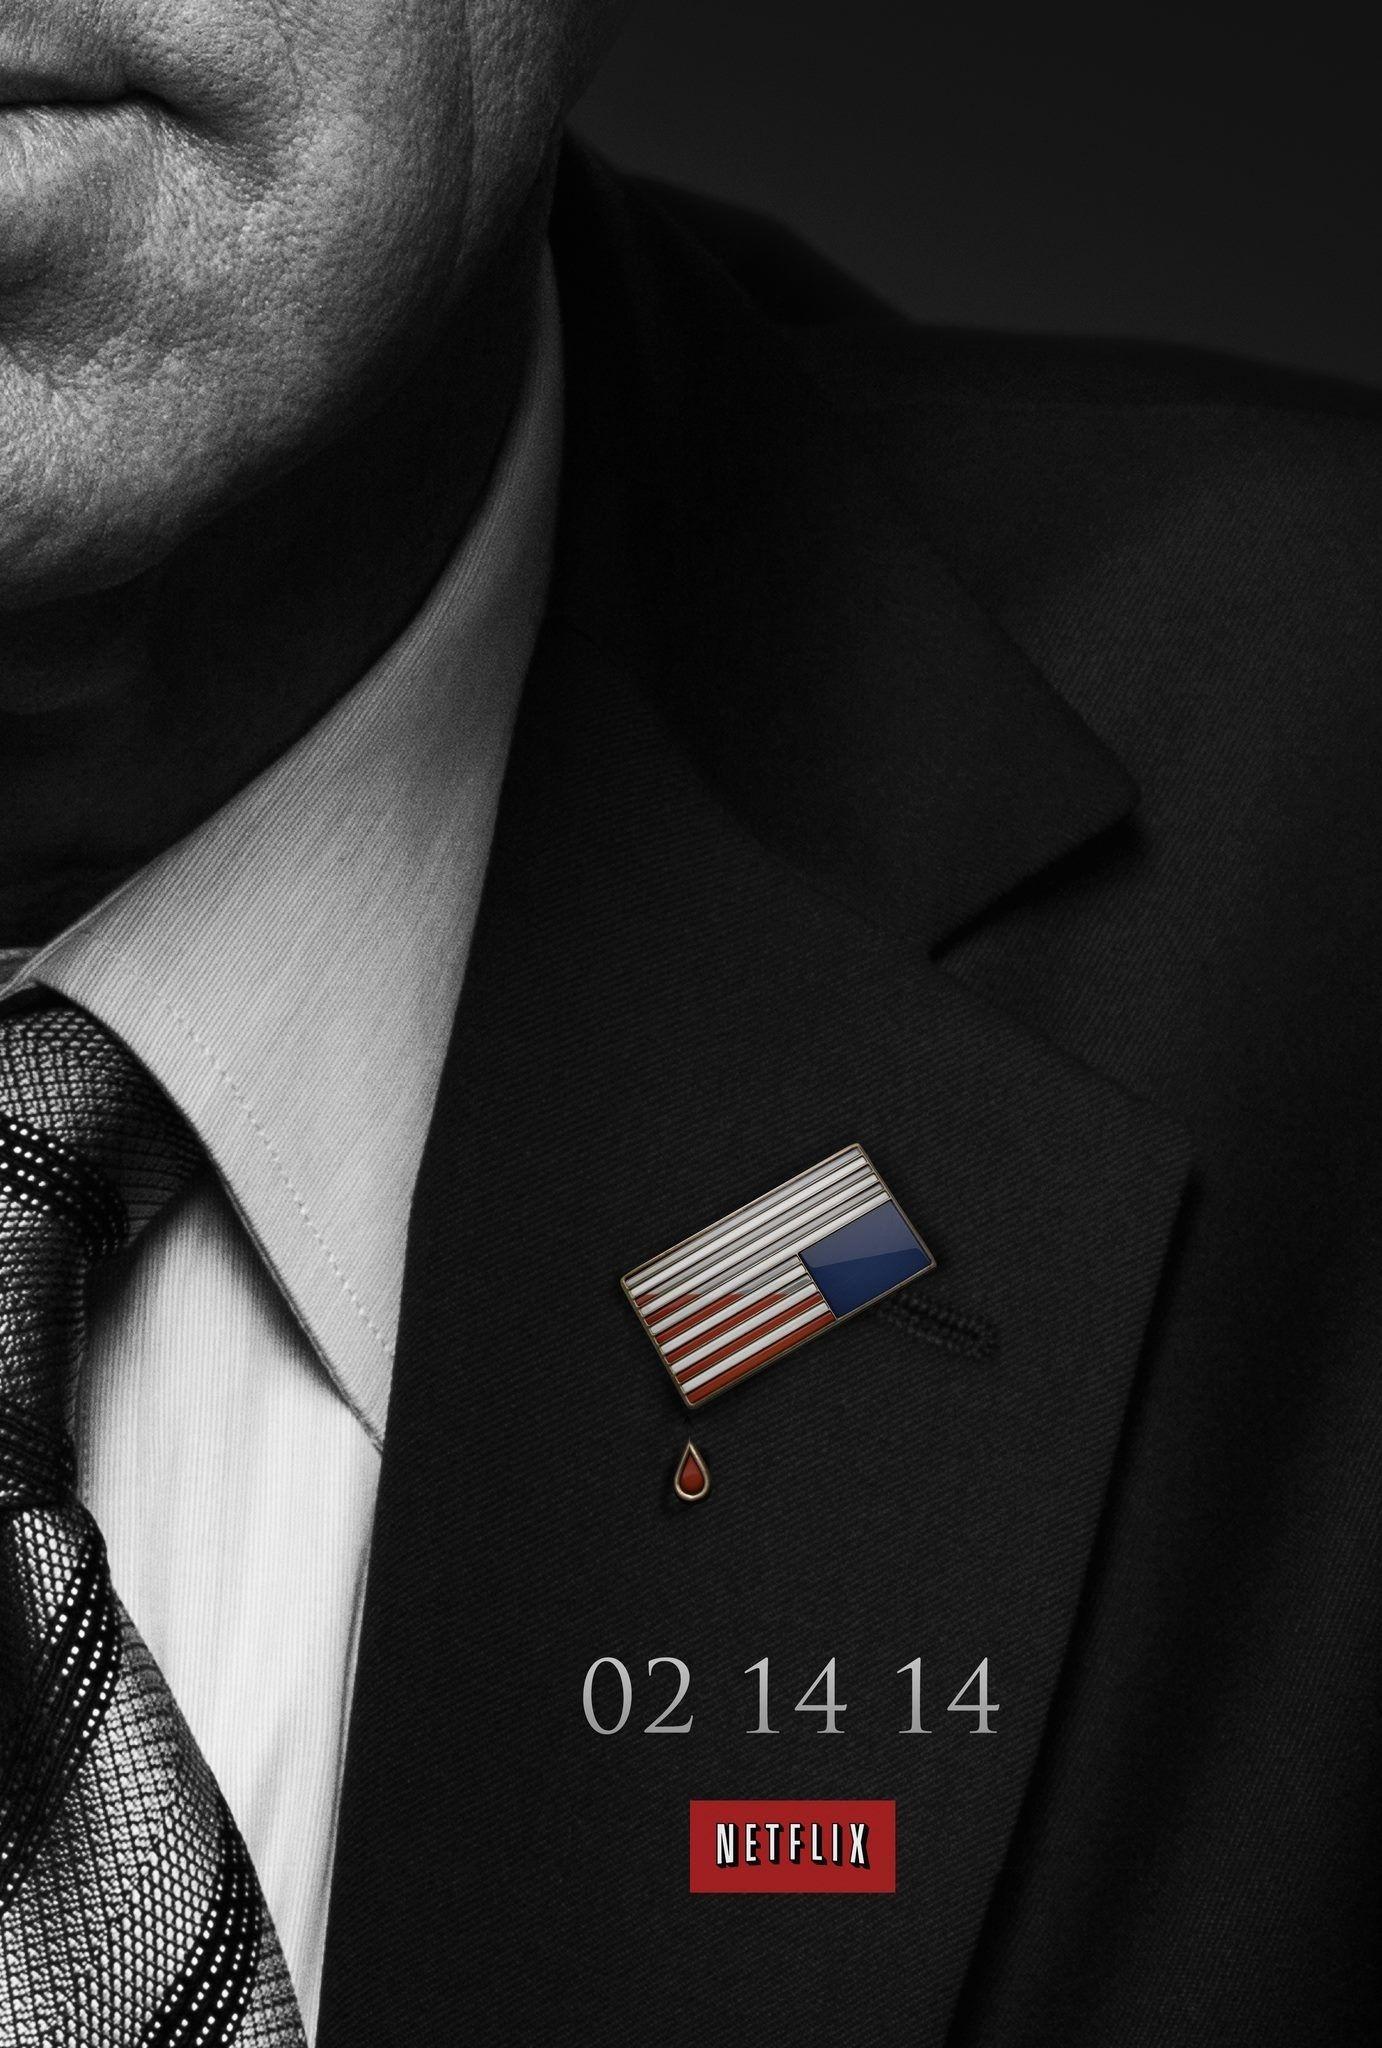 House Of Cards Wallpapers for Iphone 7, Iphone 7 plus, Iphone 6 plus